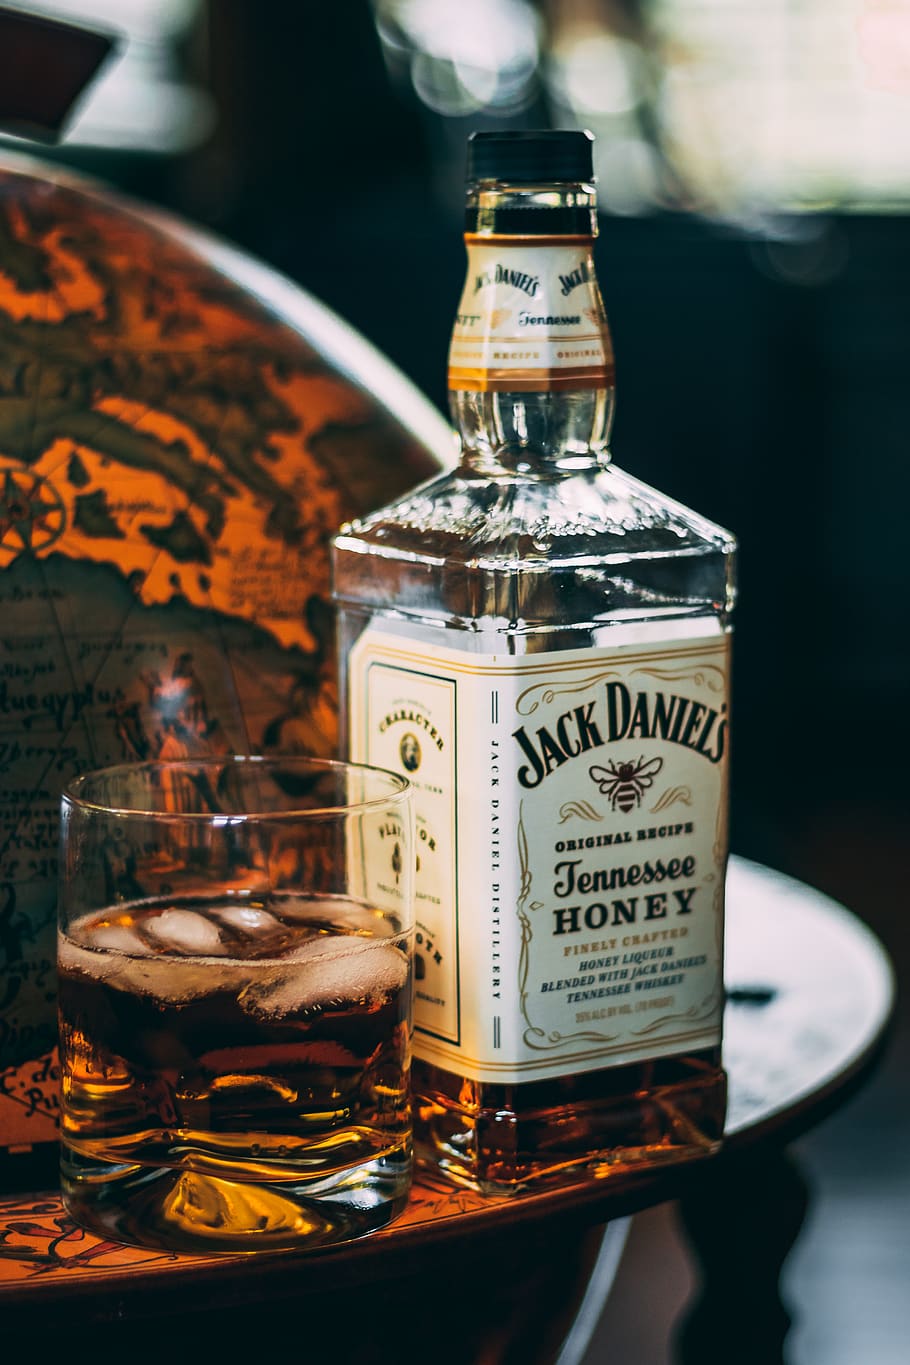 HD wallpaper: Jack Daniels Tennessee whisky bottle, alcohol, human, person  | Wallpaper Flare